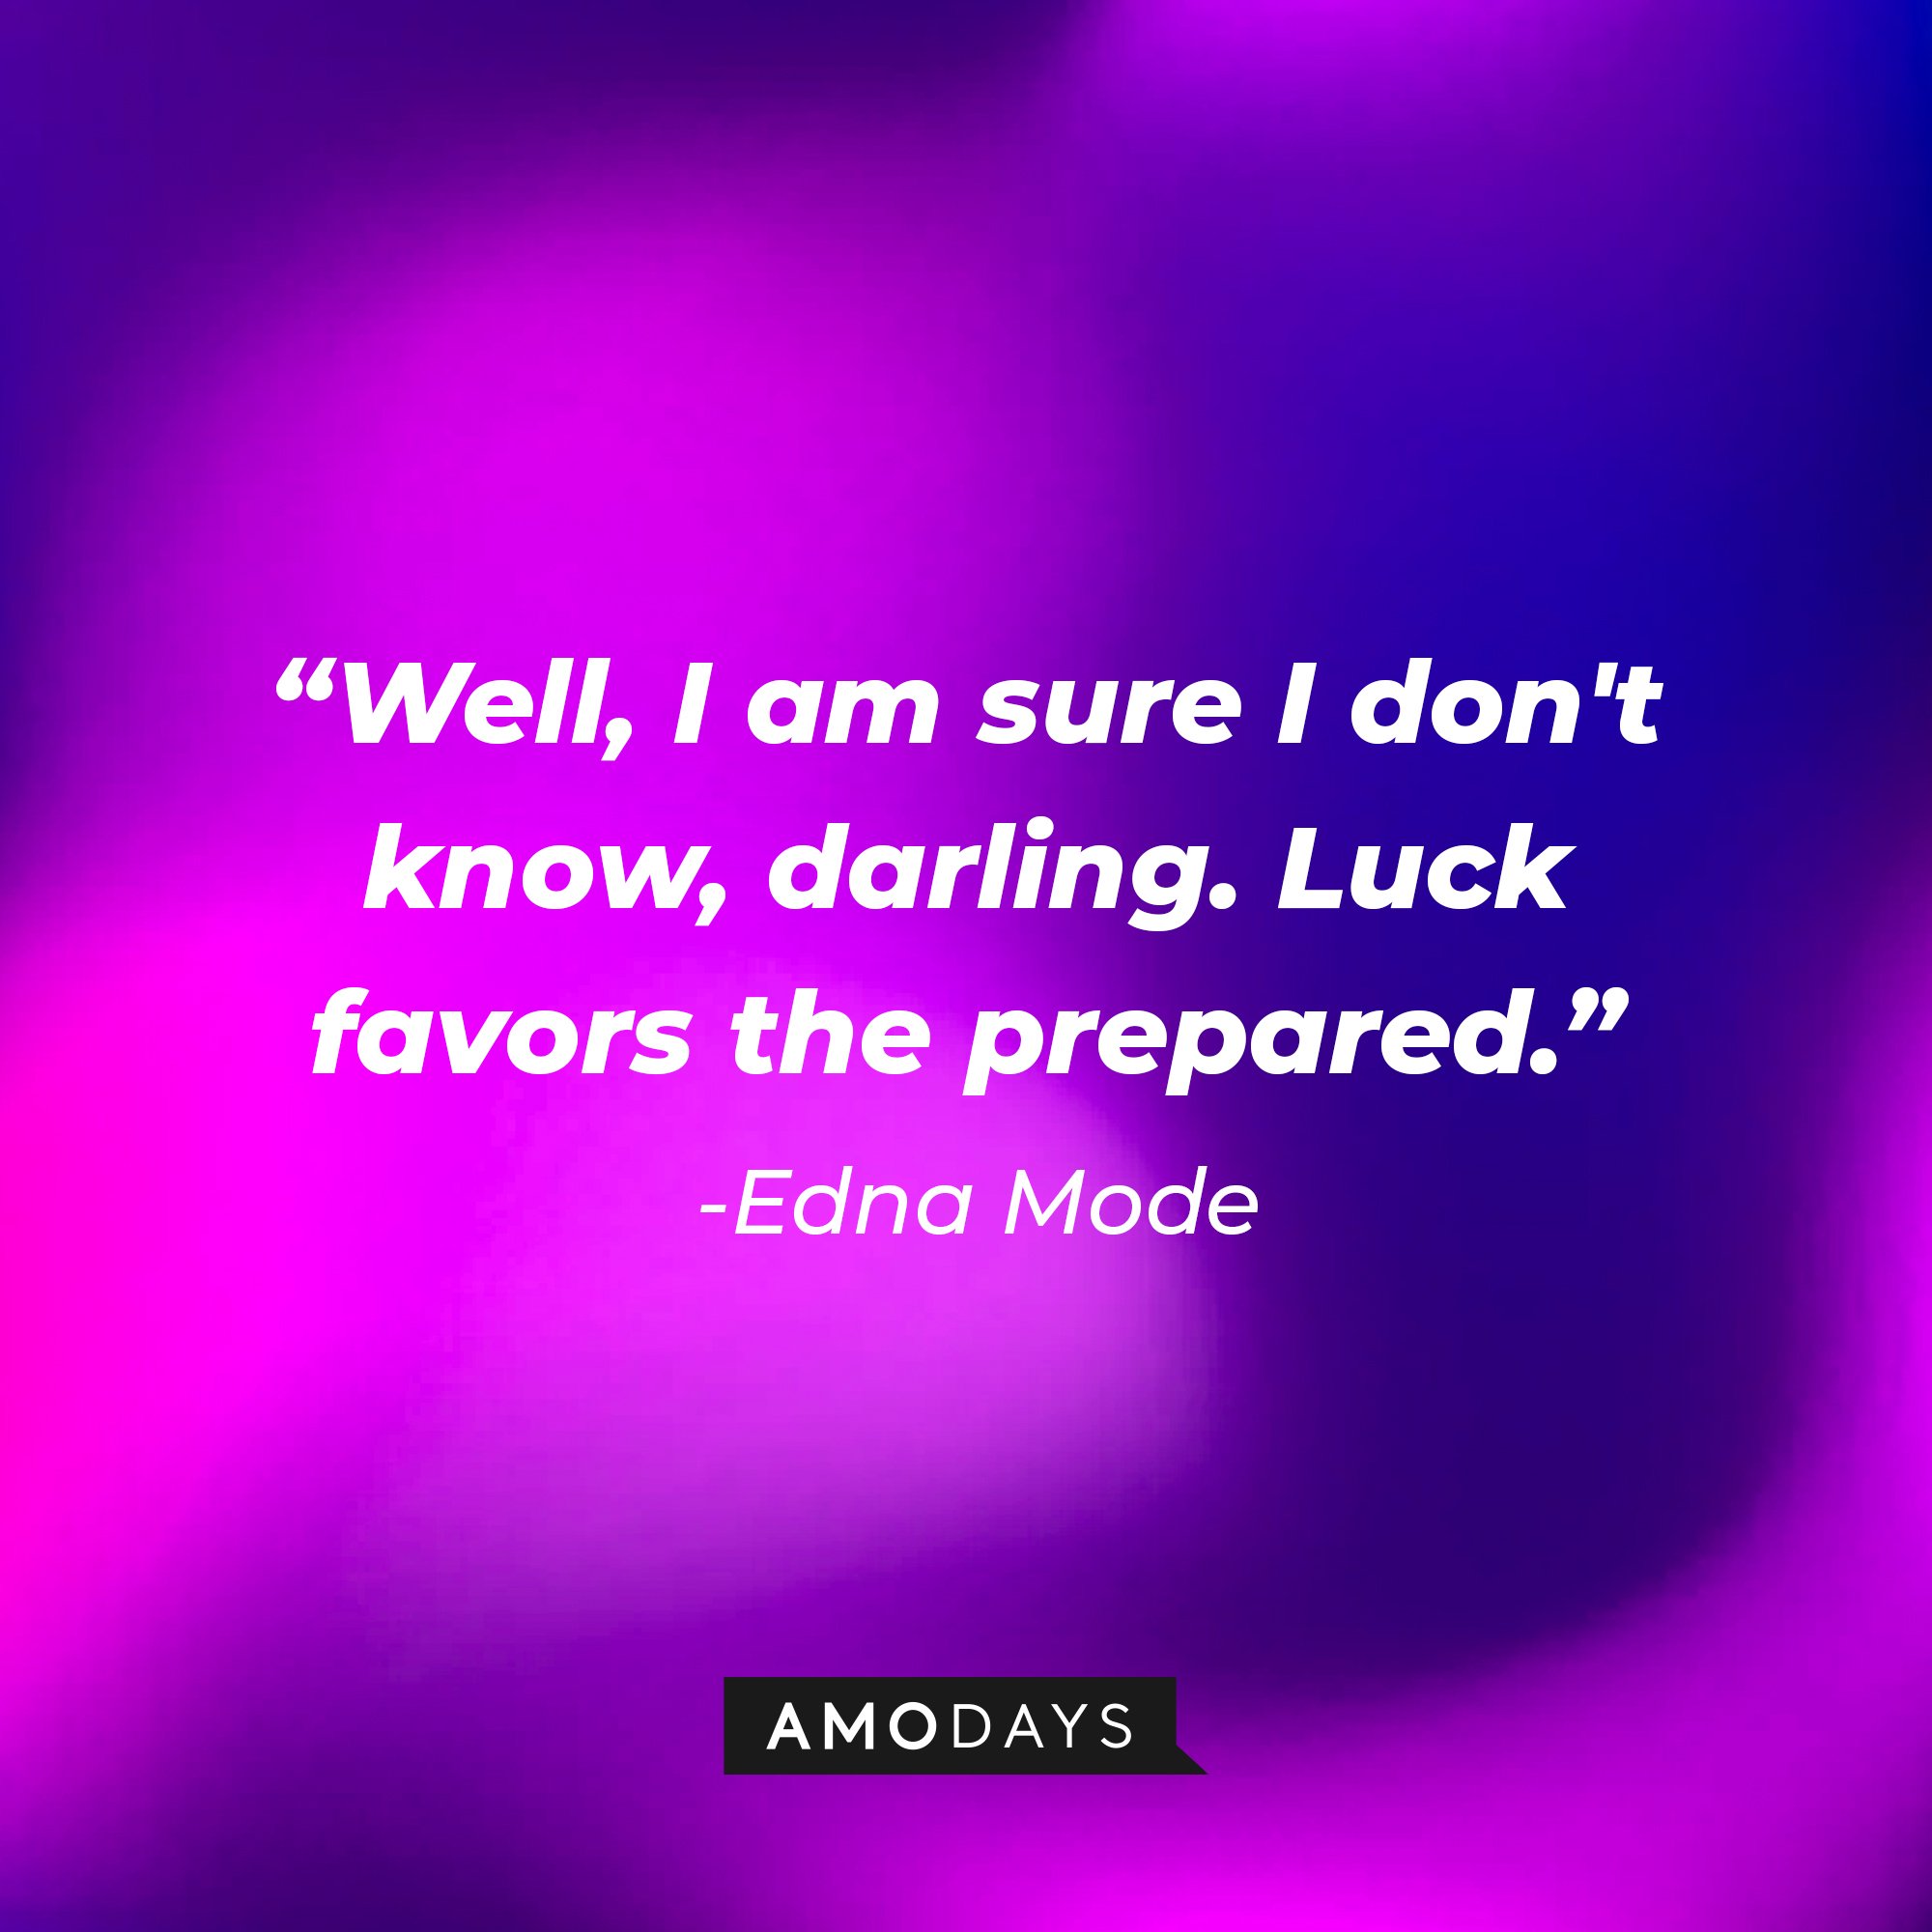 Edna Mode’s quote: "Well, I am sure I don't know, darling. Luck favors the prepared." |  Image: AmoDays